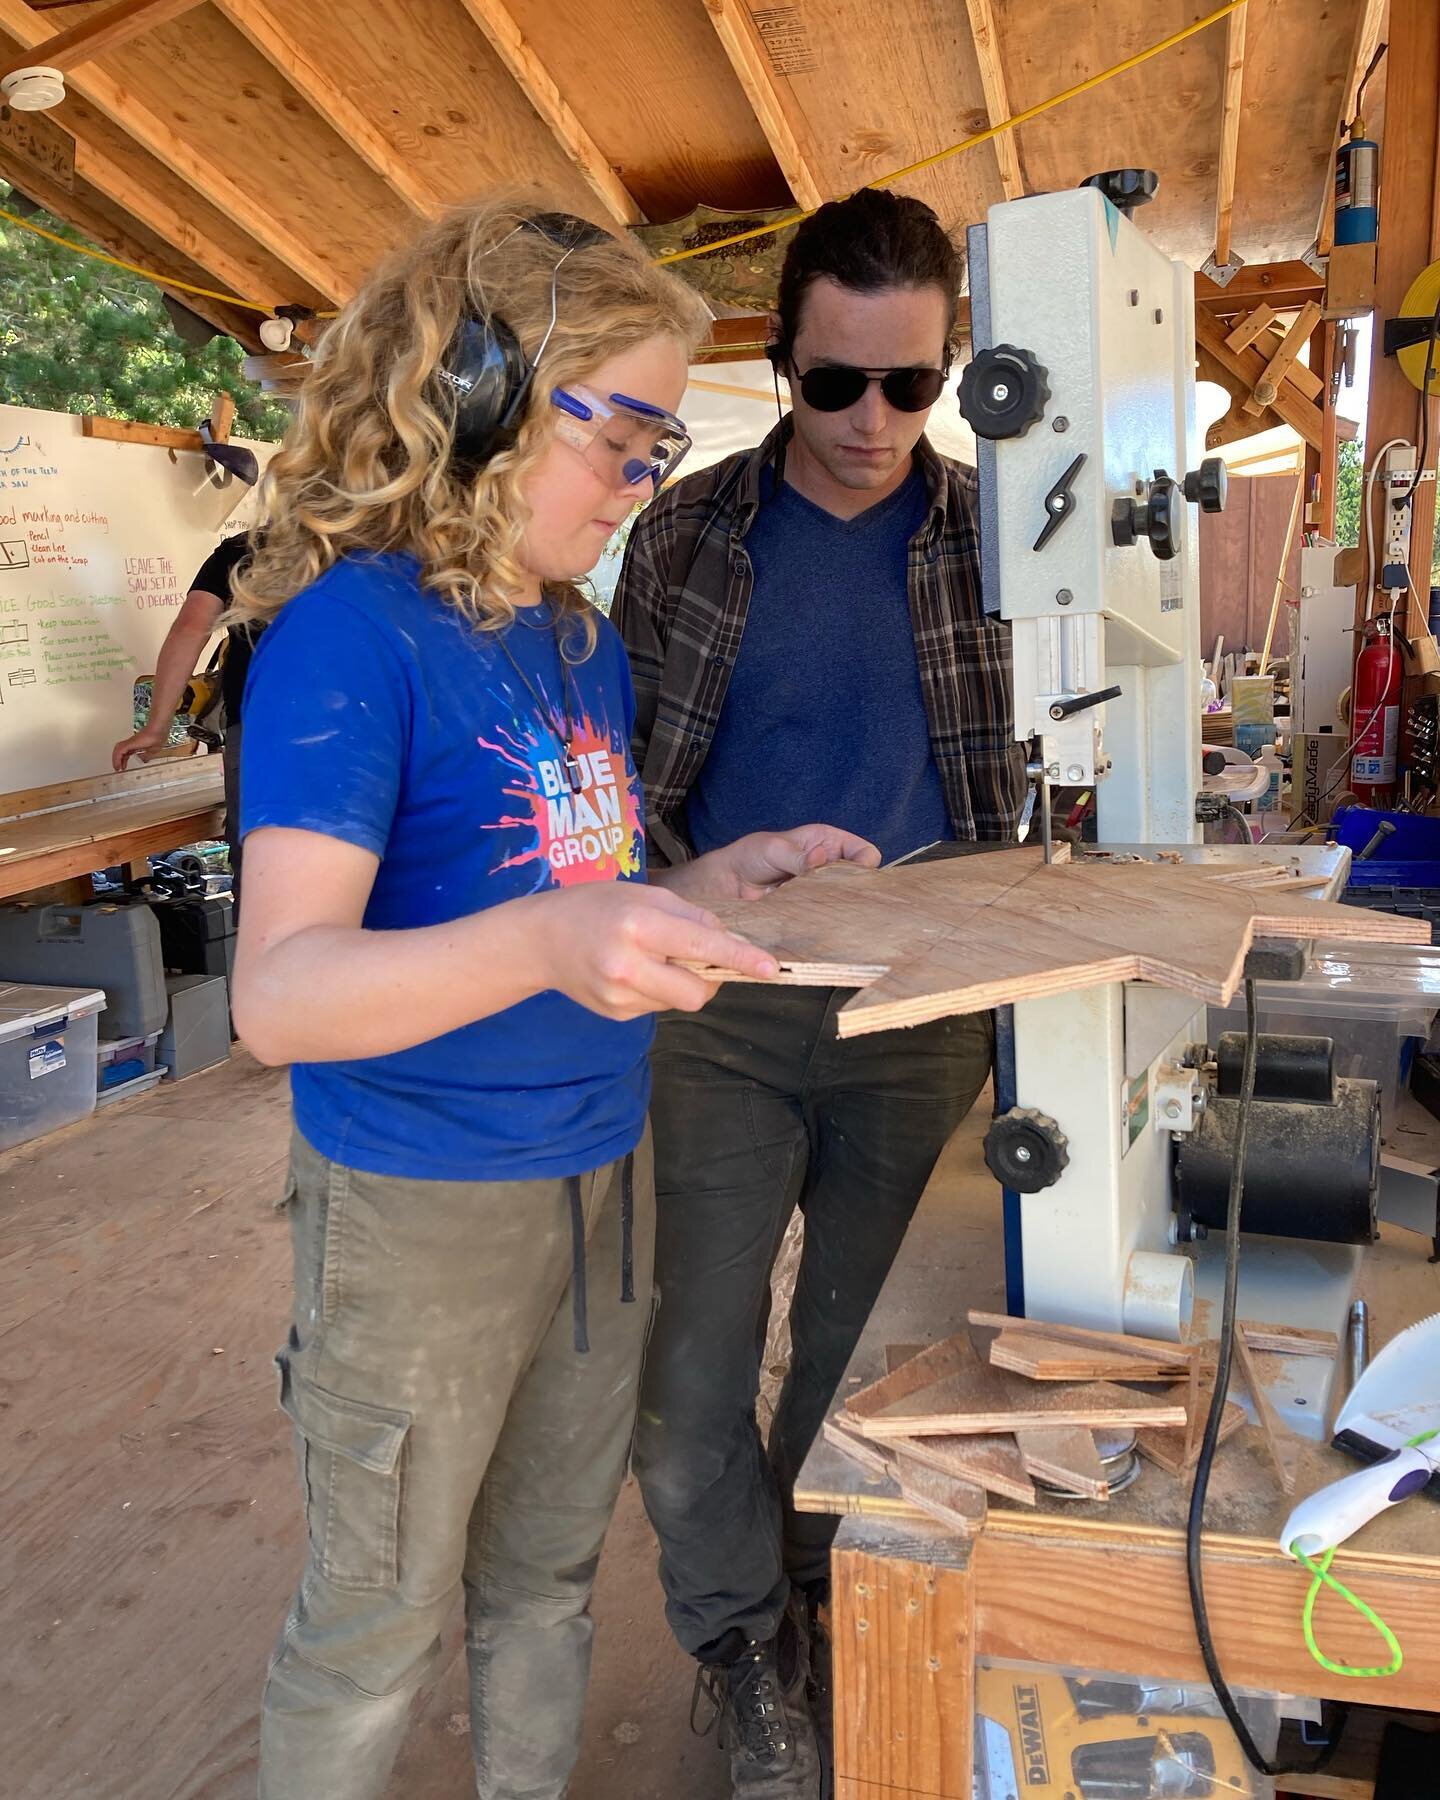 Trusting kids with tools is a core philosophy at Tinkering School. We start by teaching how to use a tool, then watch closely as tinkerers become more proficient, and then step back. Seeing us take that step back (while still close enough to step in 